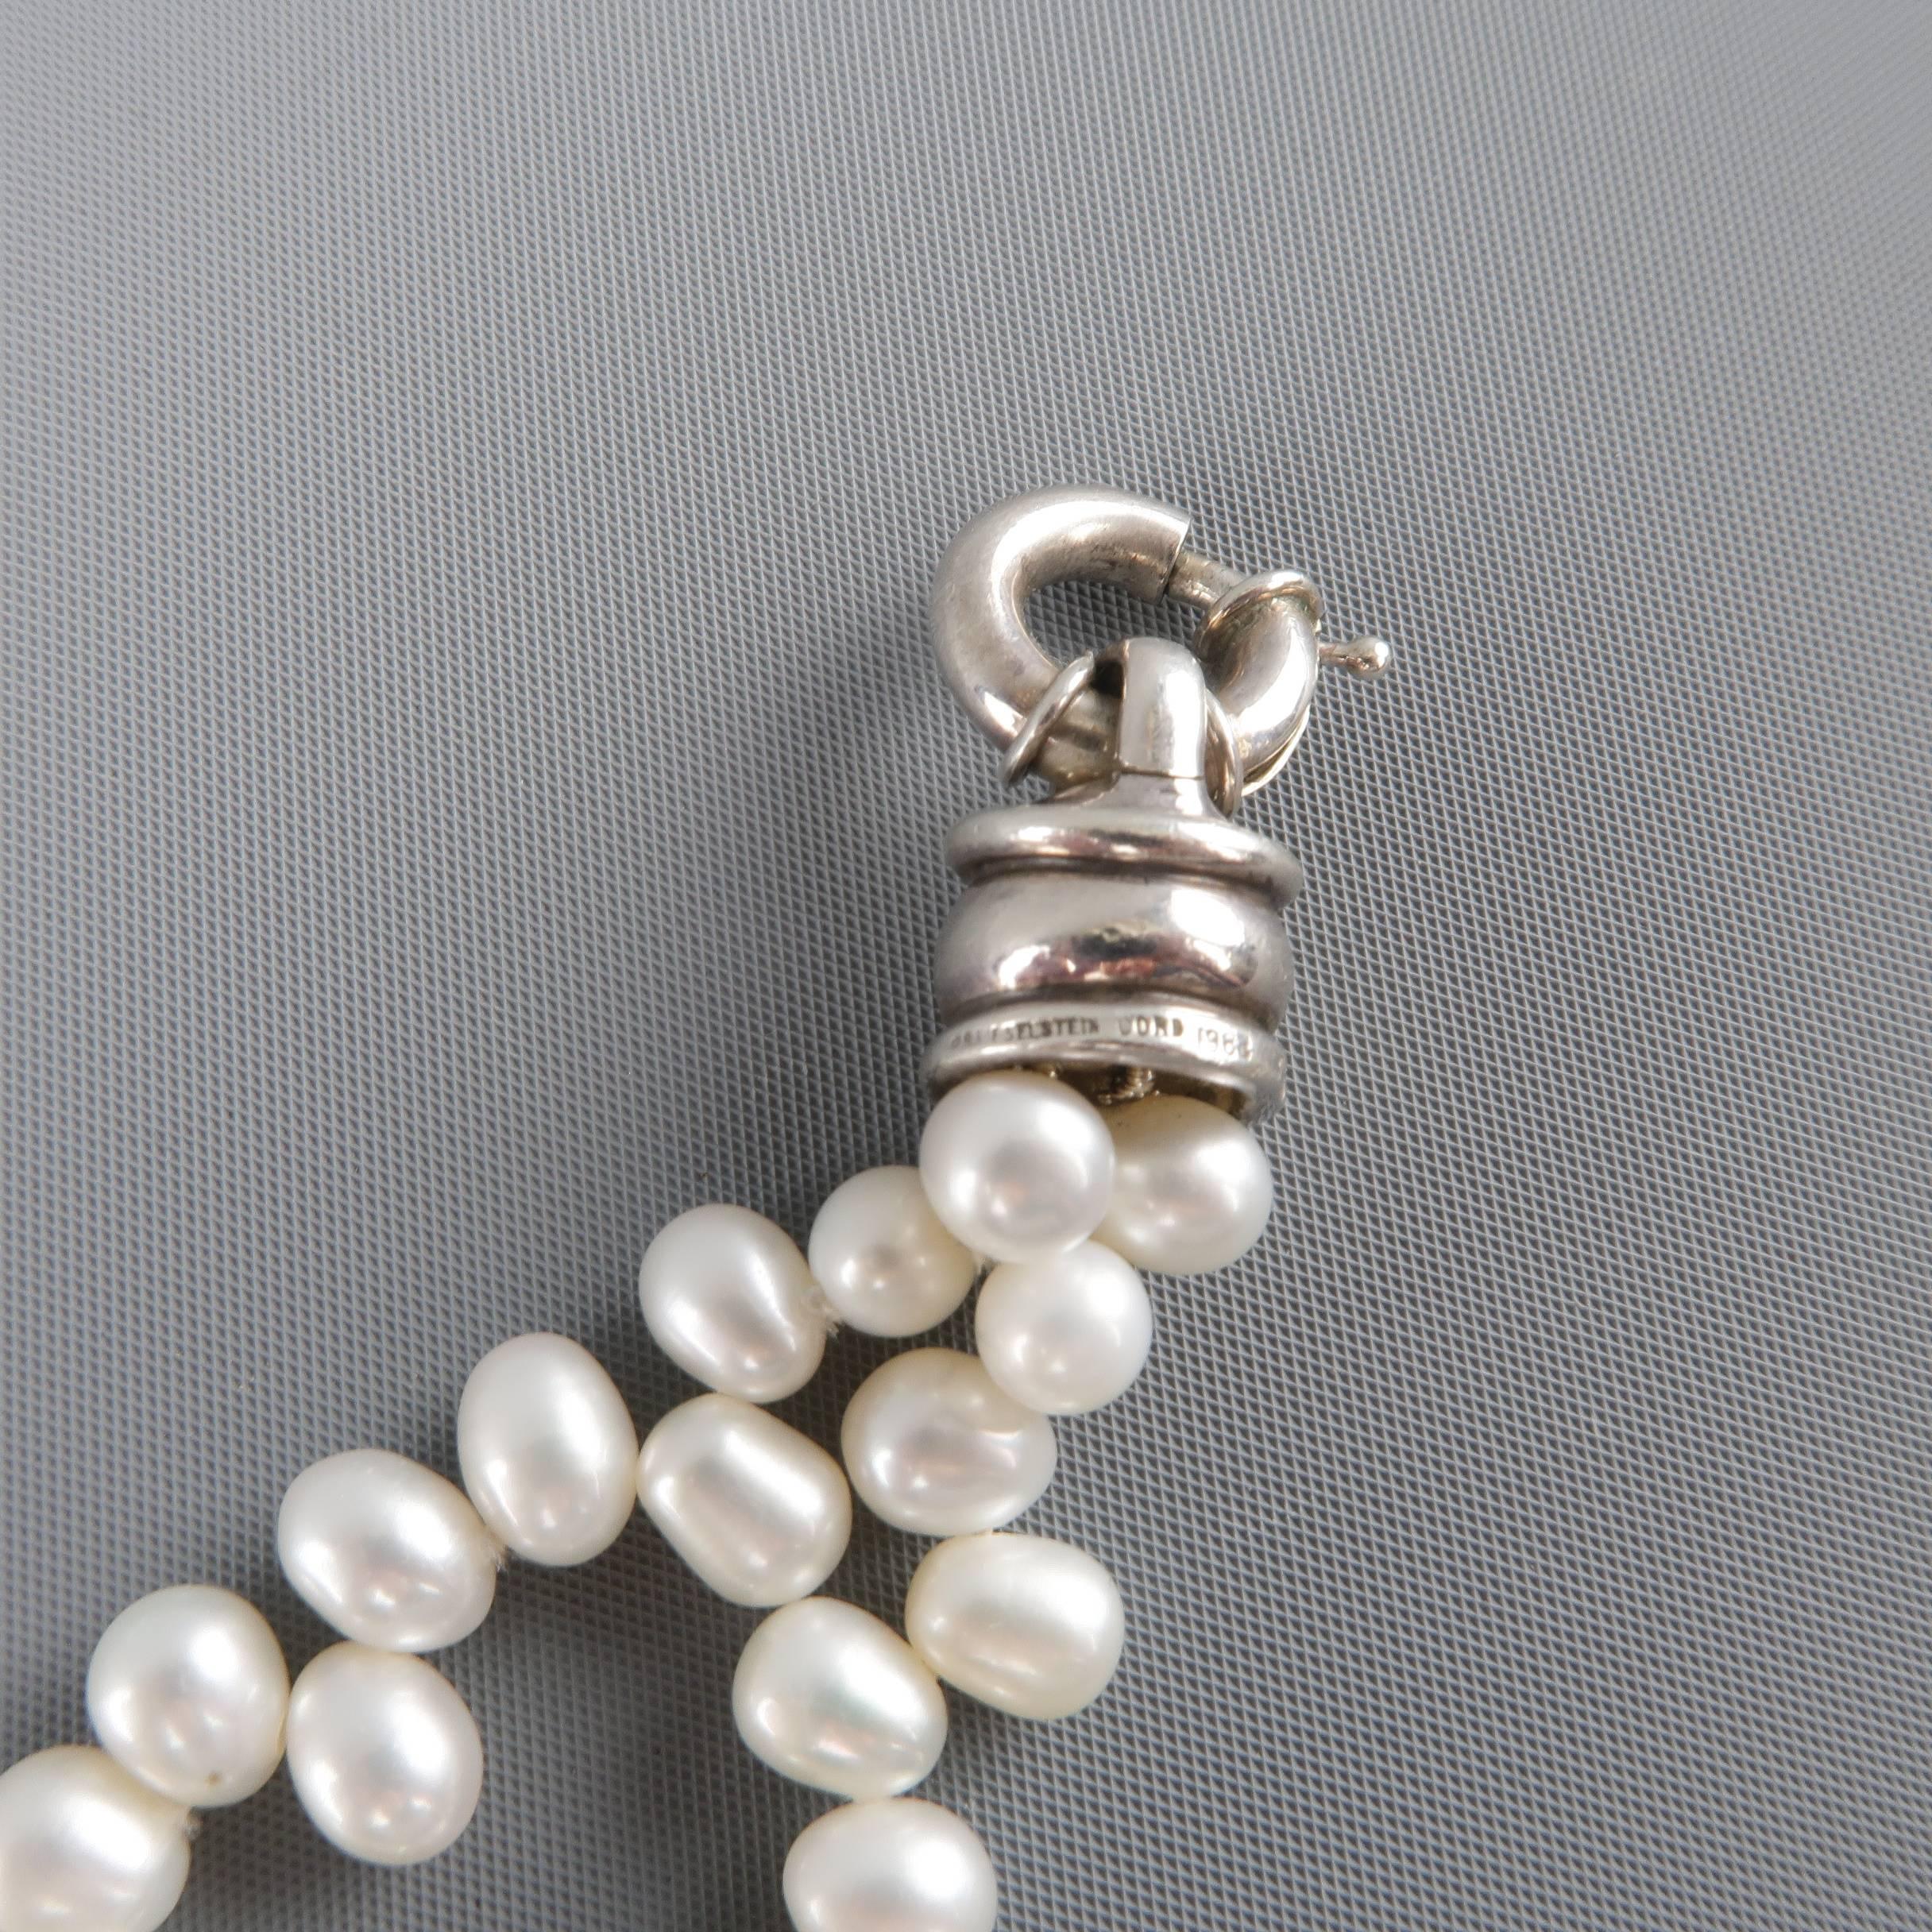 Kieselstein-Cord Bracelet Off White Pearls and Sterling Silver Alligator Clasp 2